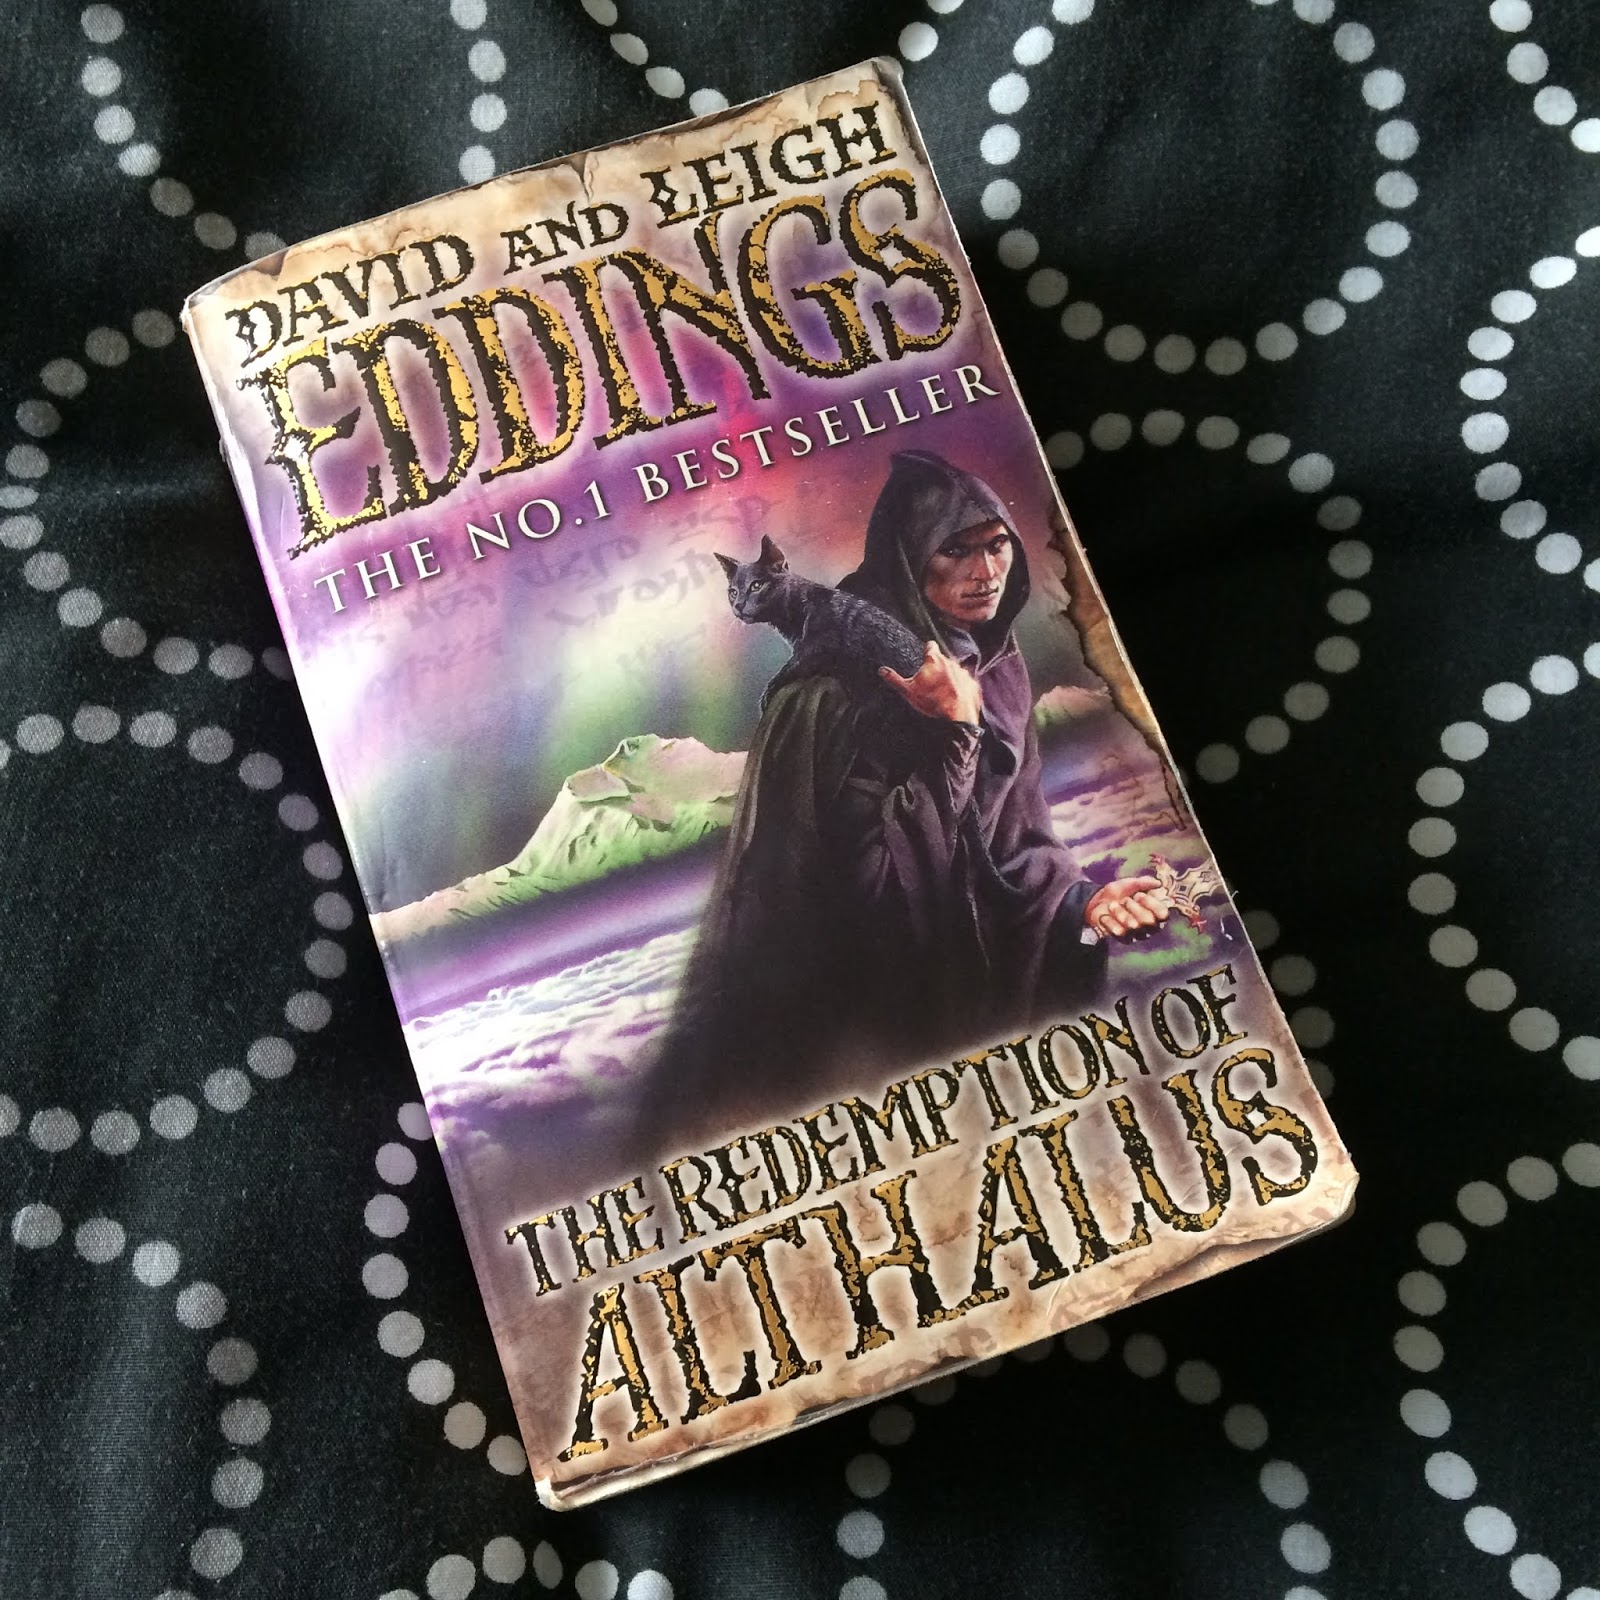 The Redemption of Althalus by David and Leigh Eddings